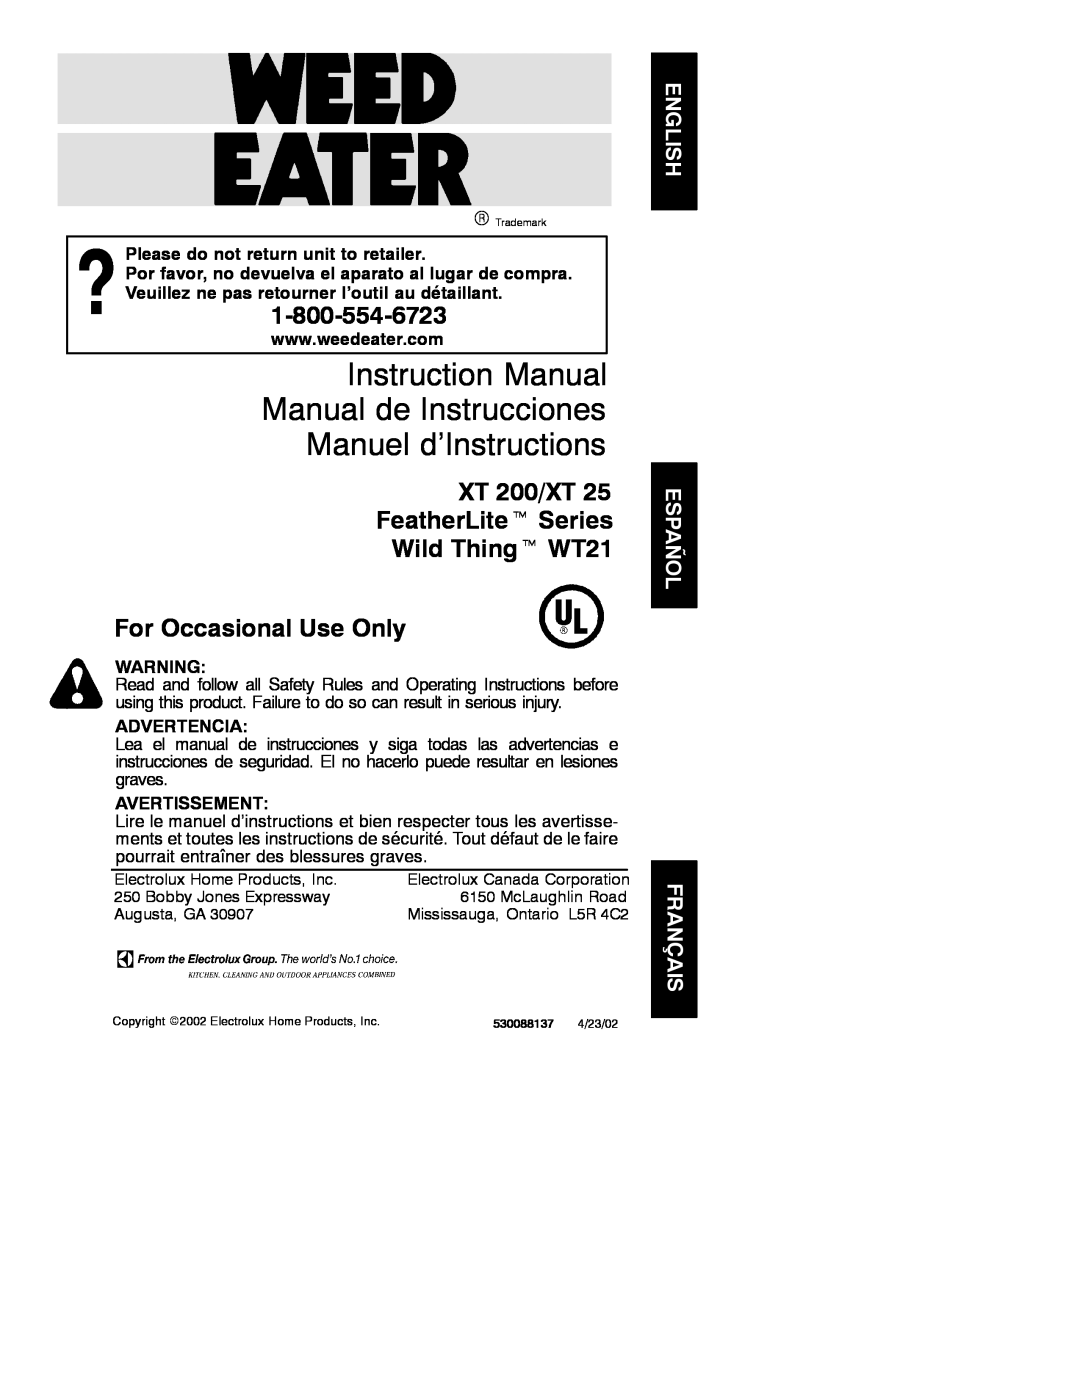 Weed Eater 530088137 instruction manual Please do not return unit to retailer, Advertencia, Avertissement 